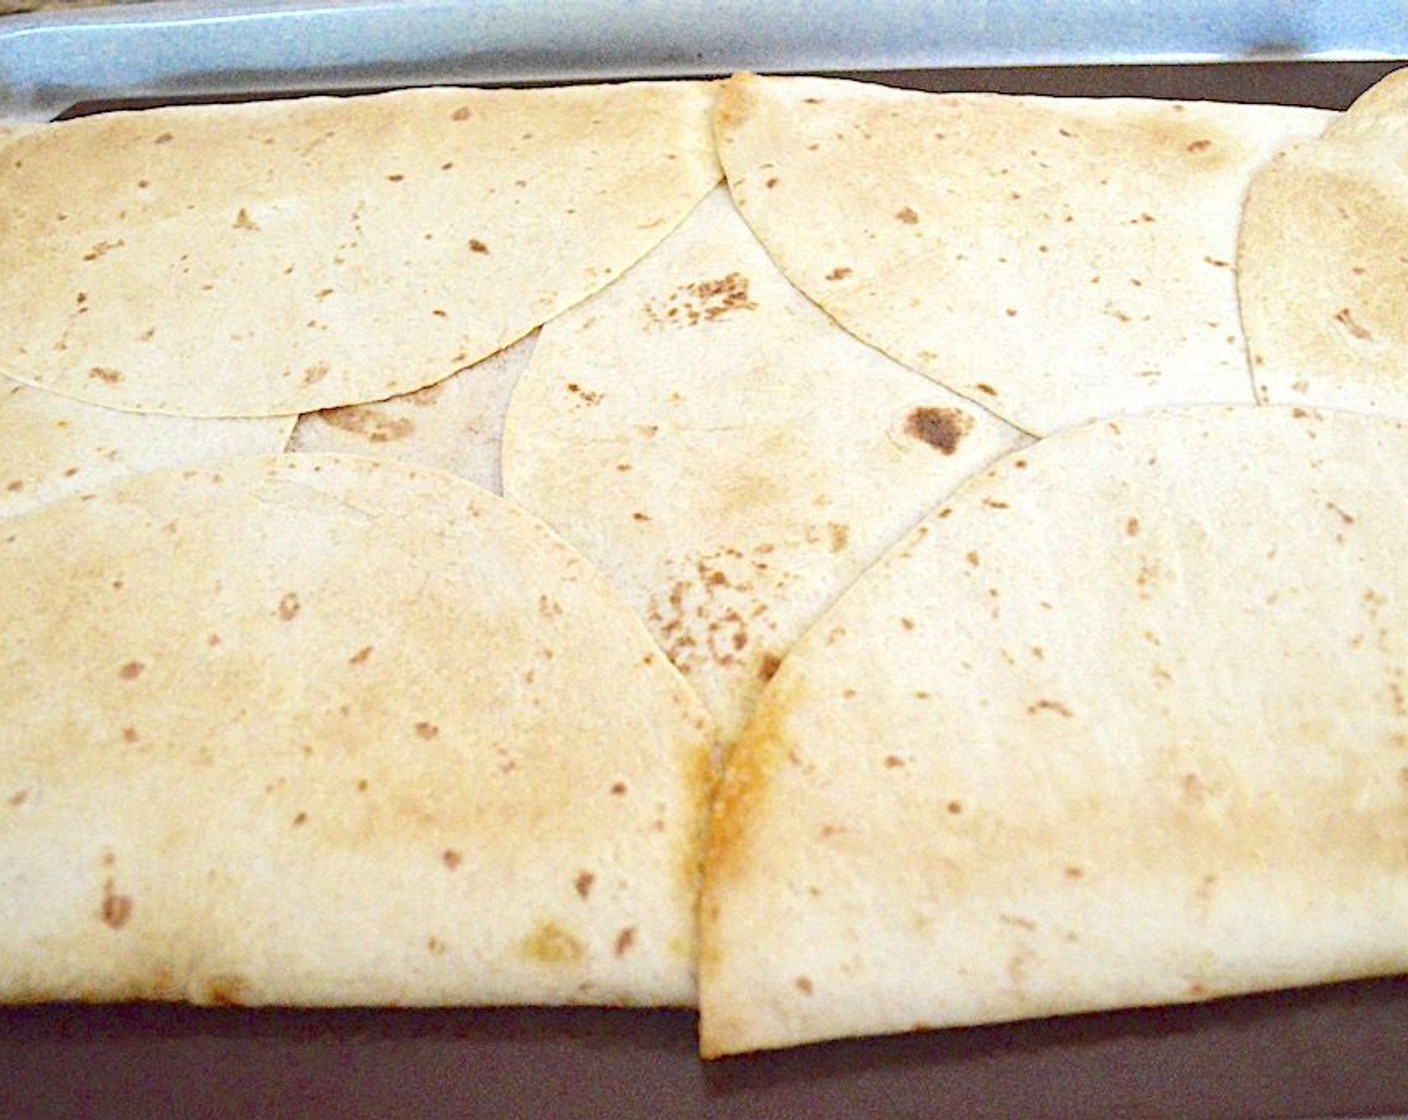 step 11 Then, take it out and remove the heavy pan, top sheet pan and parchment and return the crunch wrap to the oven for another 6-8 minutes to really let it crisp up on top.